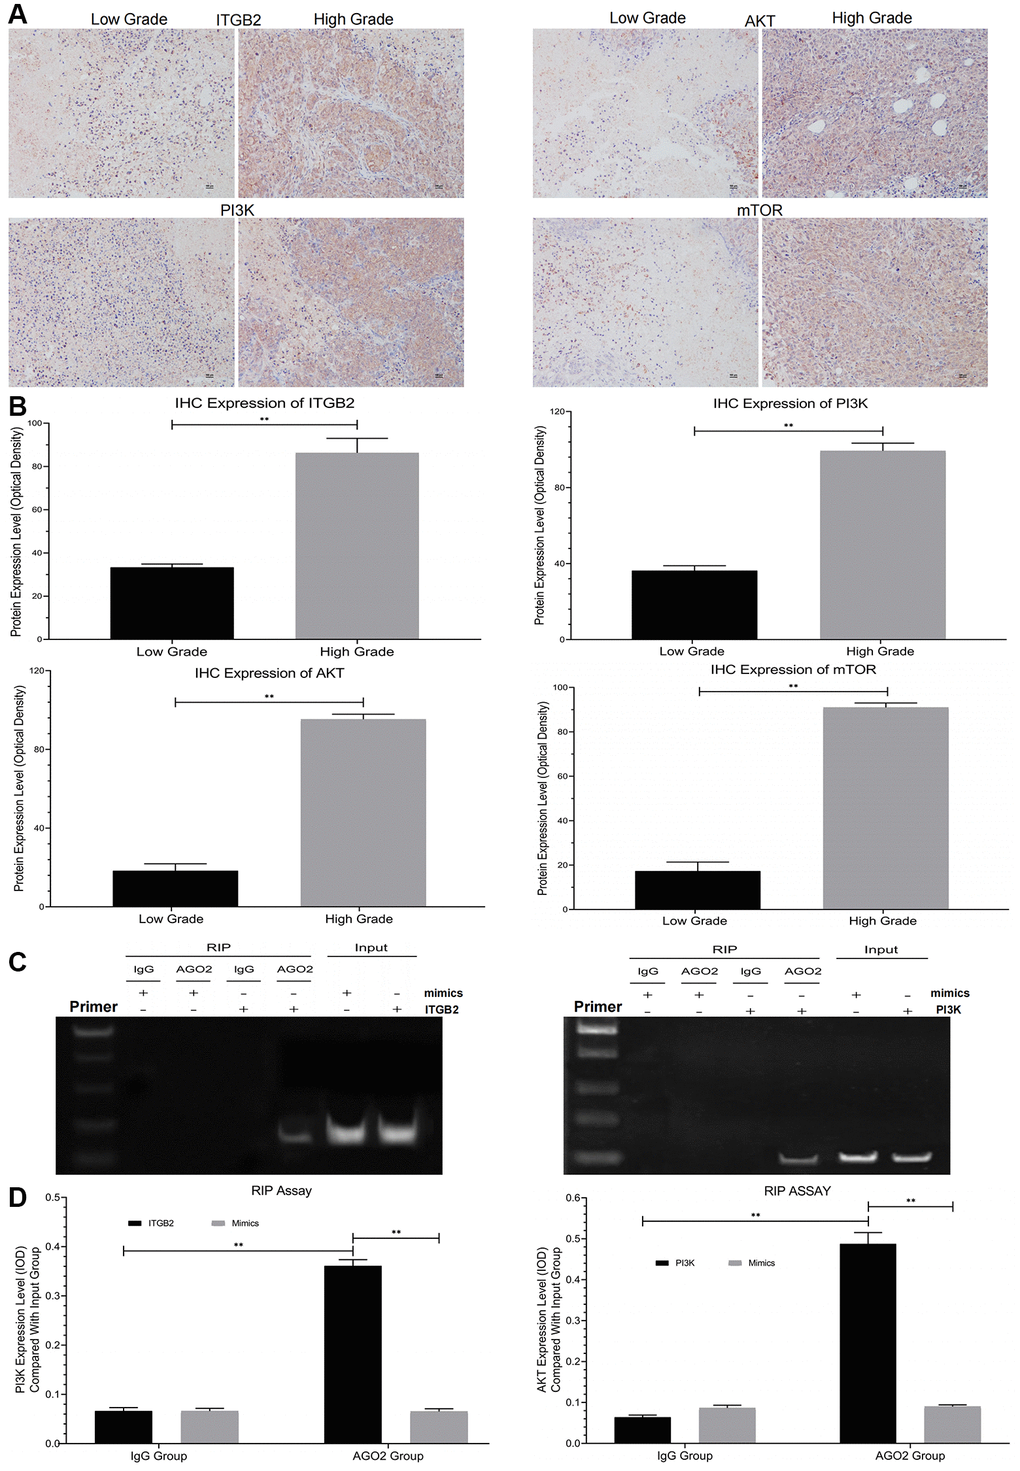 Detection of signal pathway expression in clinical ovarian cancer samples and RIP assay. (A, B) Immunohistochemical detection of ITGB2-PI3K-AKT-mTOR in different grades of ovarian cancer tissues (FIGO I-IV) and data statistics. (C, D) RIP assays of signal pathway factors (ITGB2, AKT vs PI3K) and data statistics.